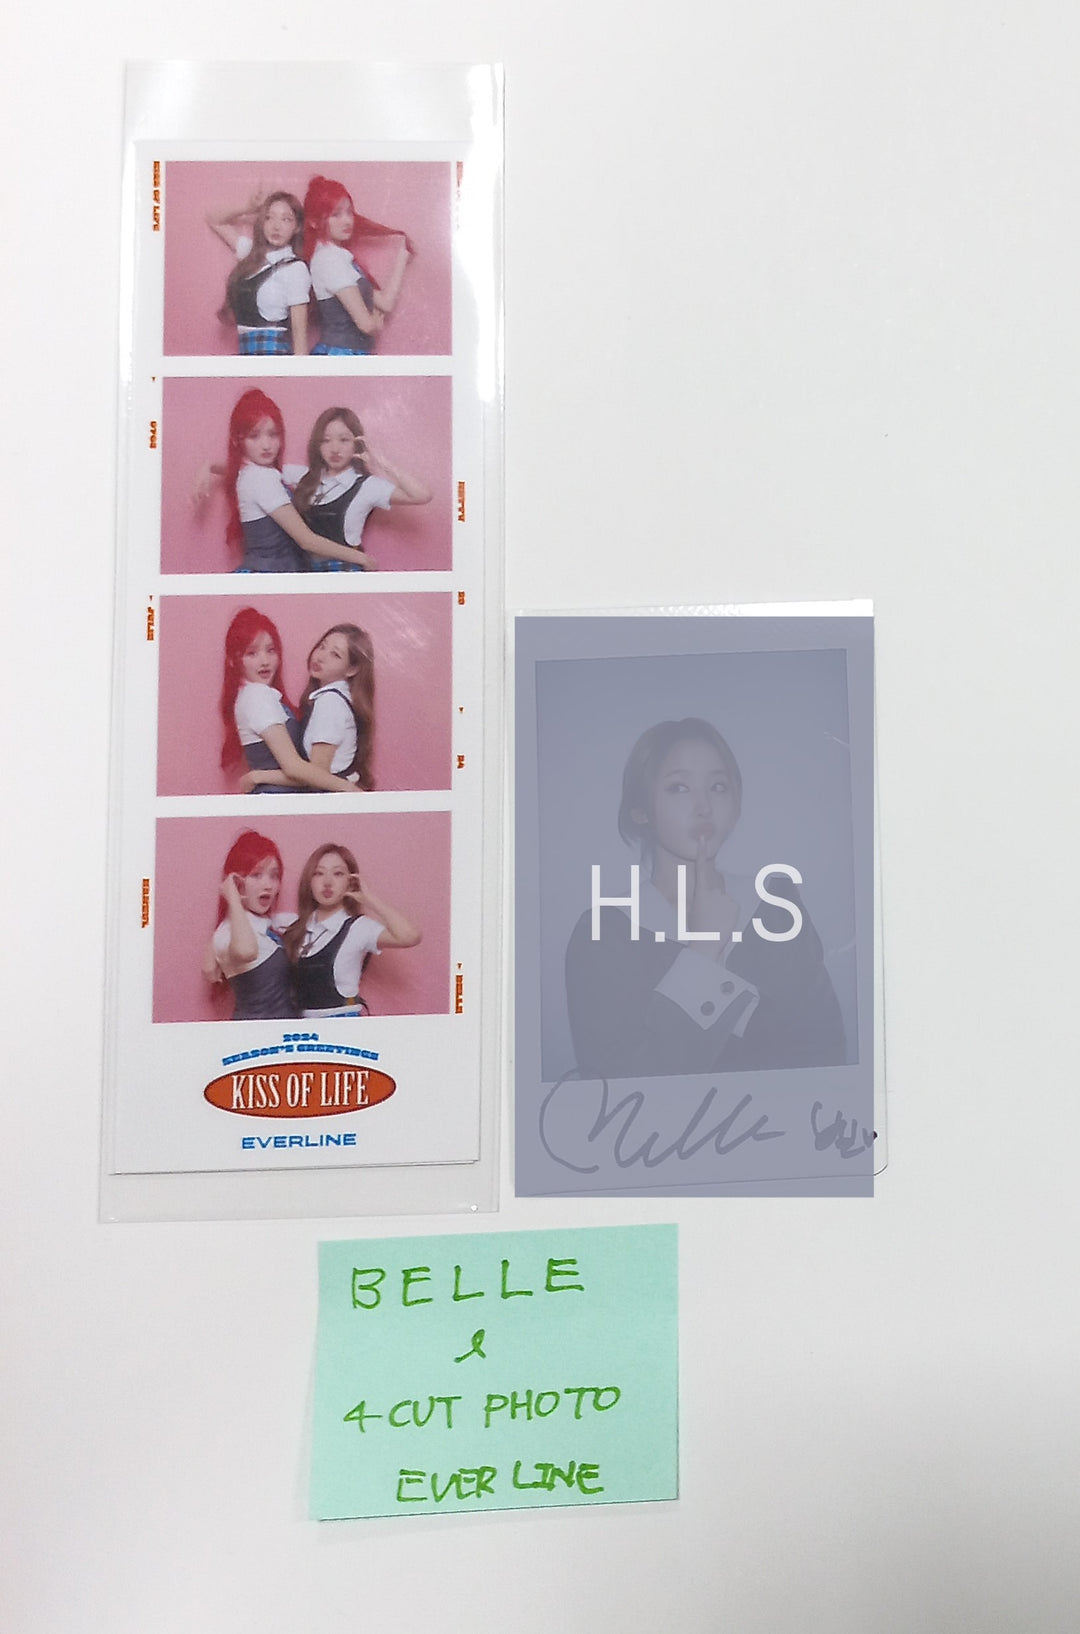 BELLE (Of KISS OF LIFE) "Born to be XX" - Hand Autographed(Signed) Polaroid & 4 Cut Photo [24.1.29]